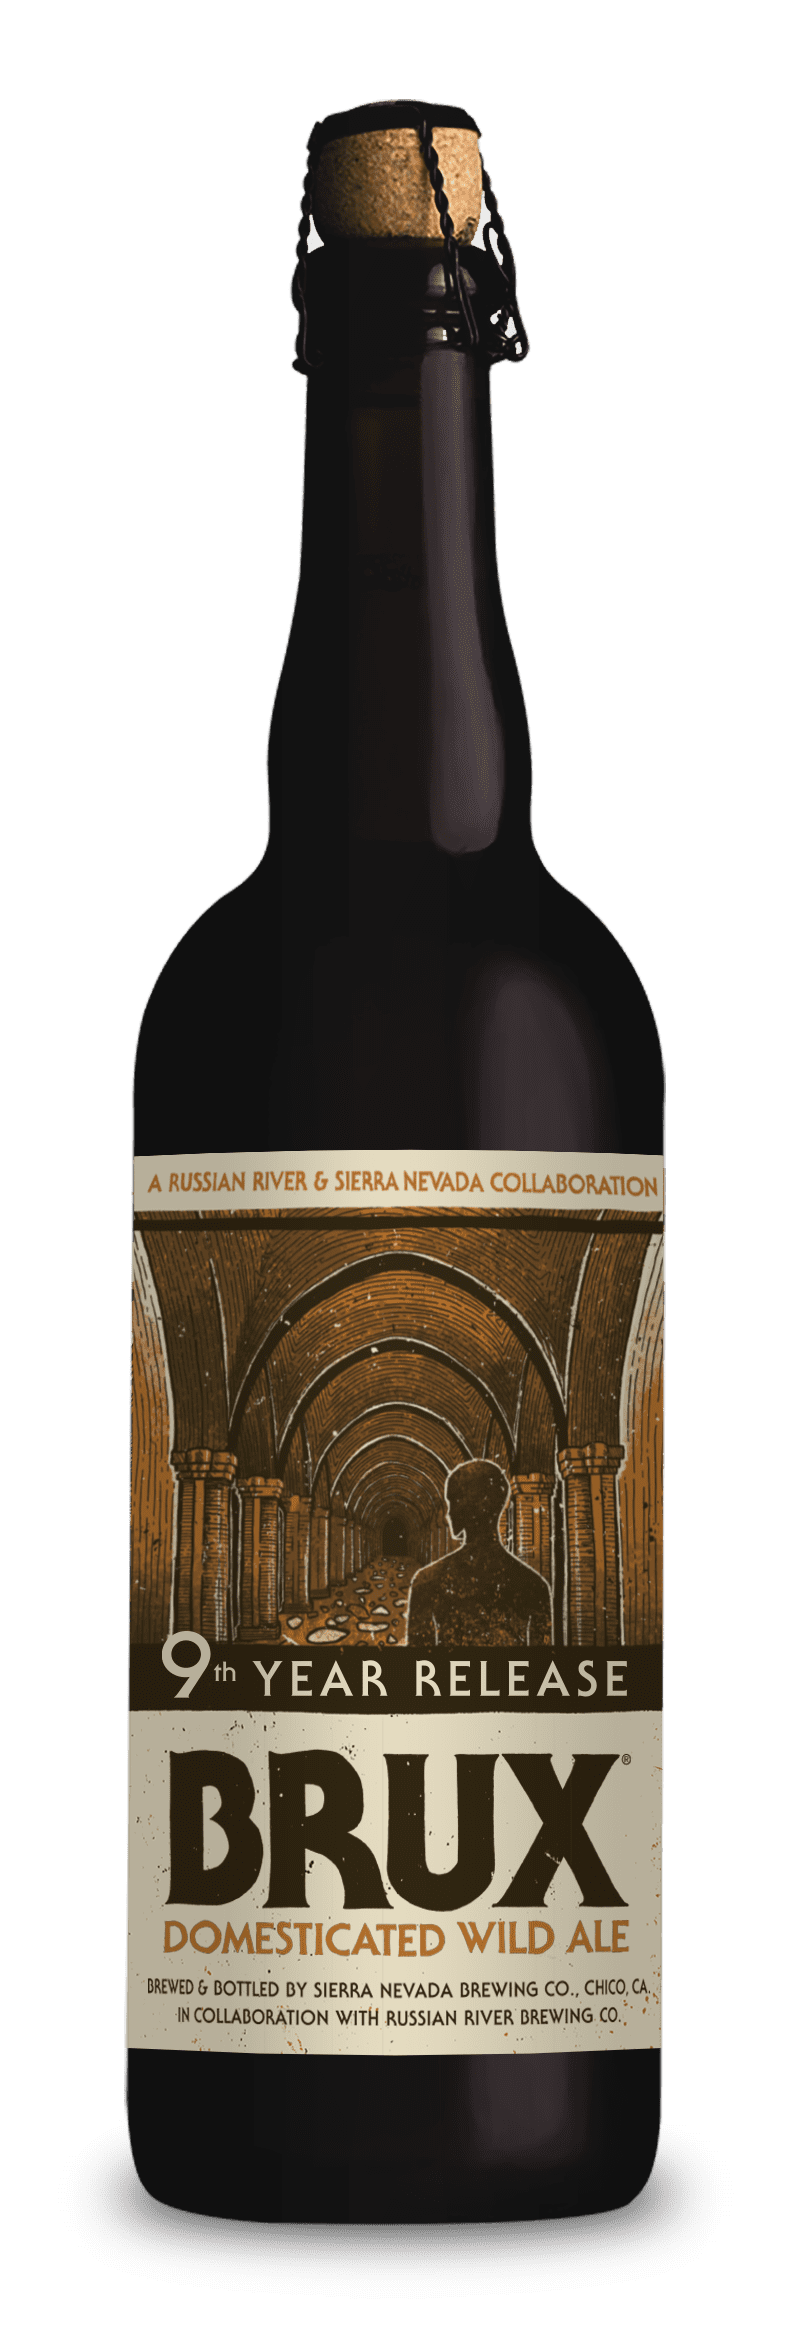 Brux - Refermented Beer & Russian Ale